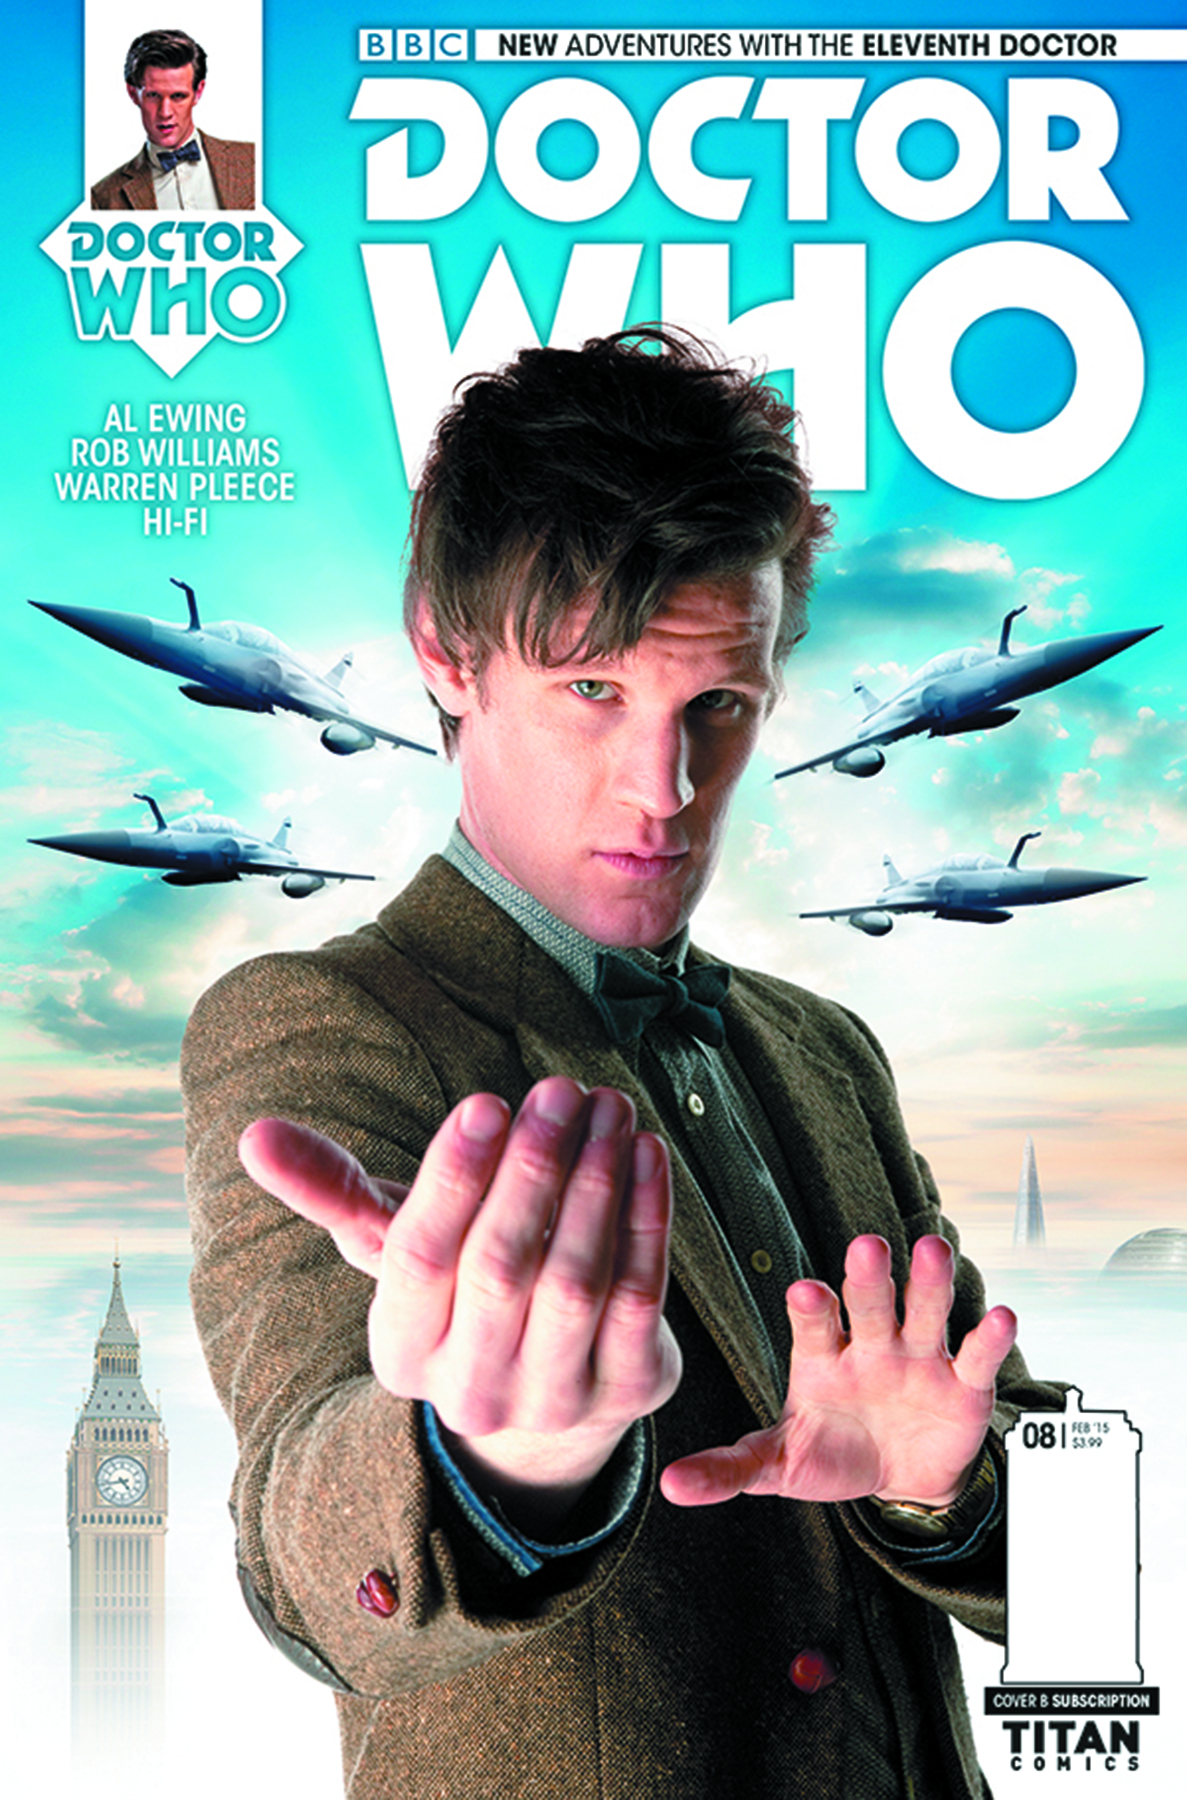 DOCTOR WHO 11TH #8 SUBSCRIPTION PHOTO